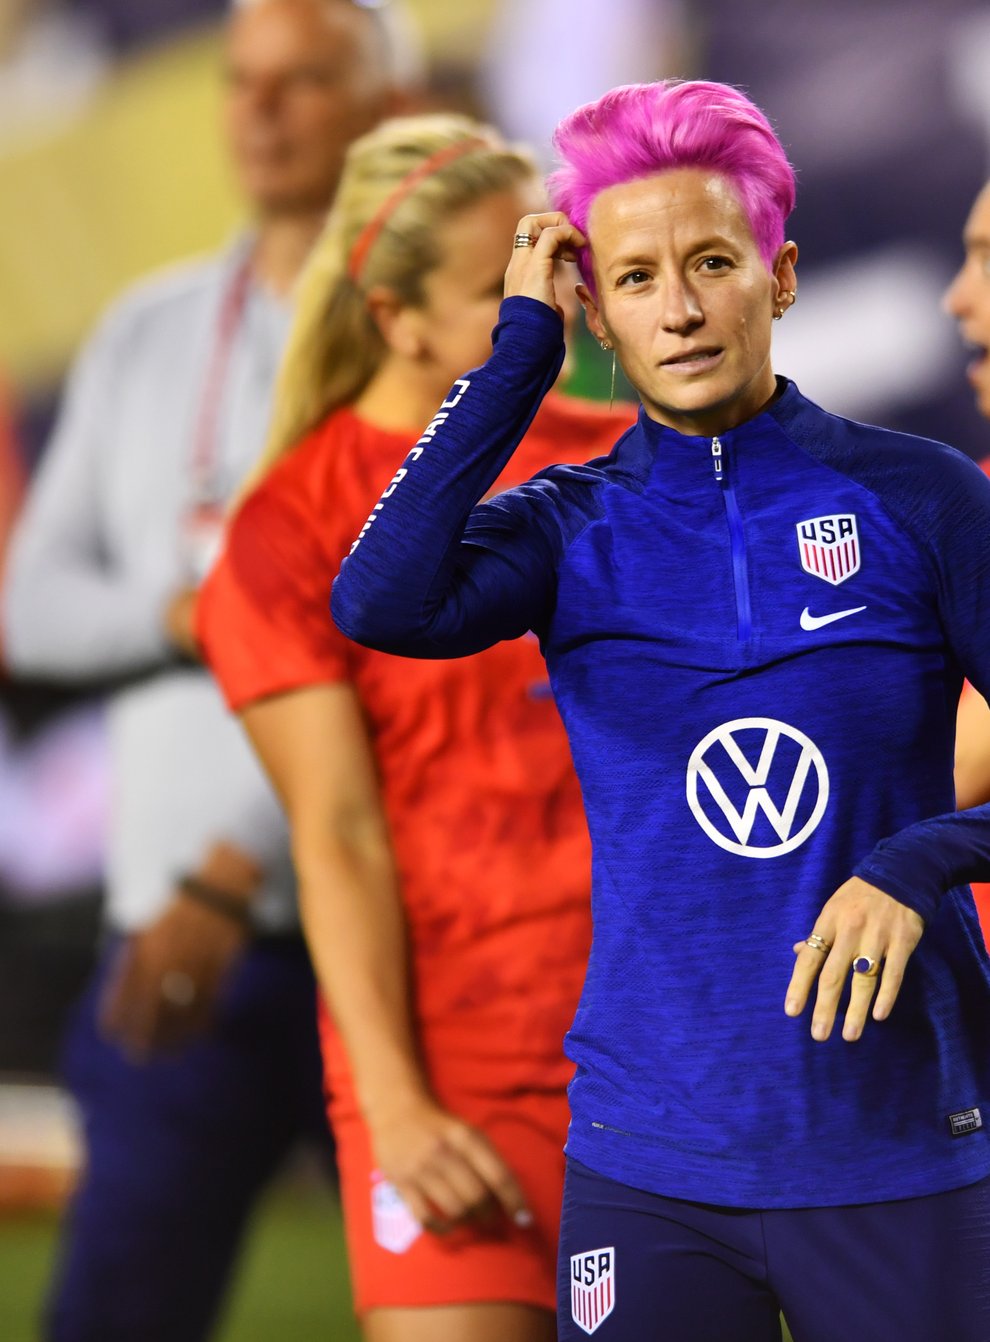 Rapinoe has previously kneeled before a game in a show of solidarity with black people fighting police brutality